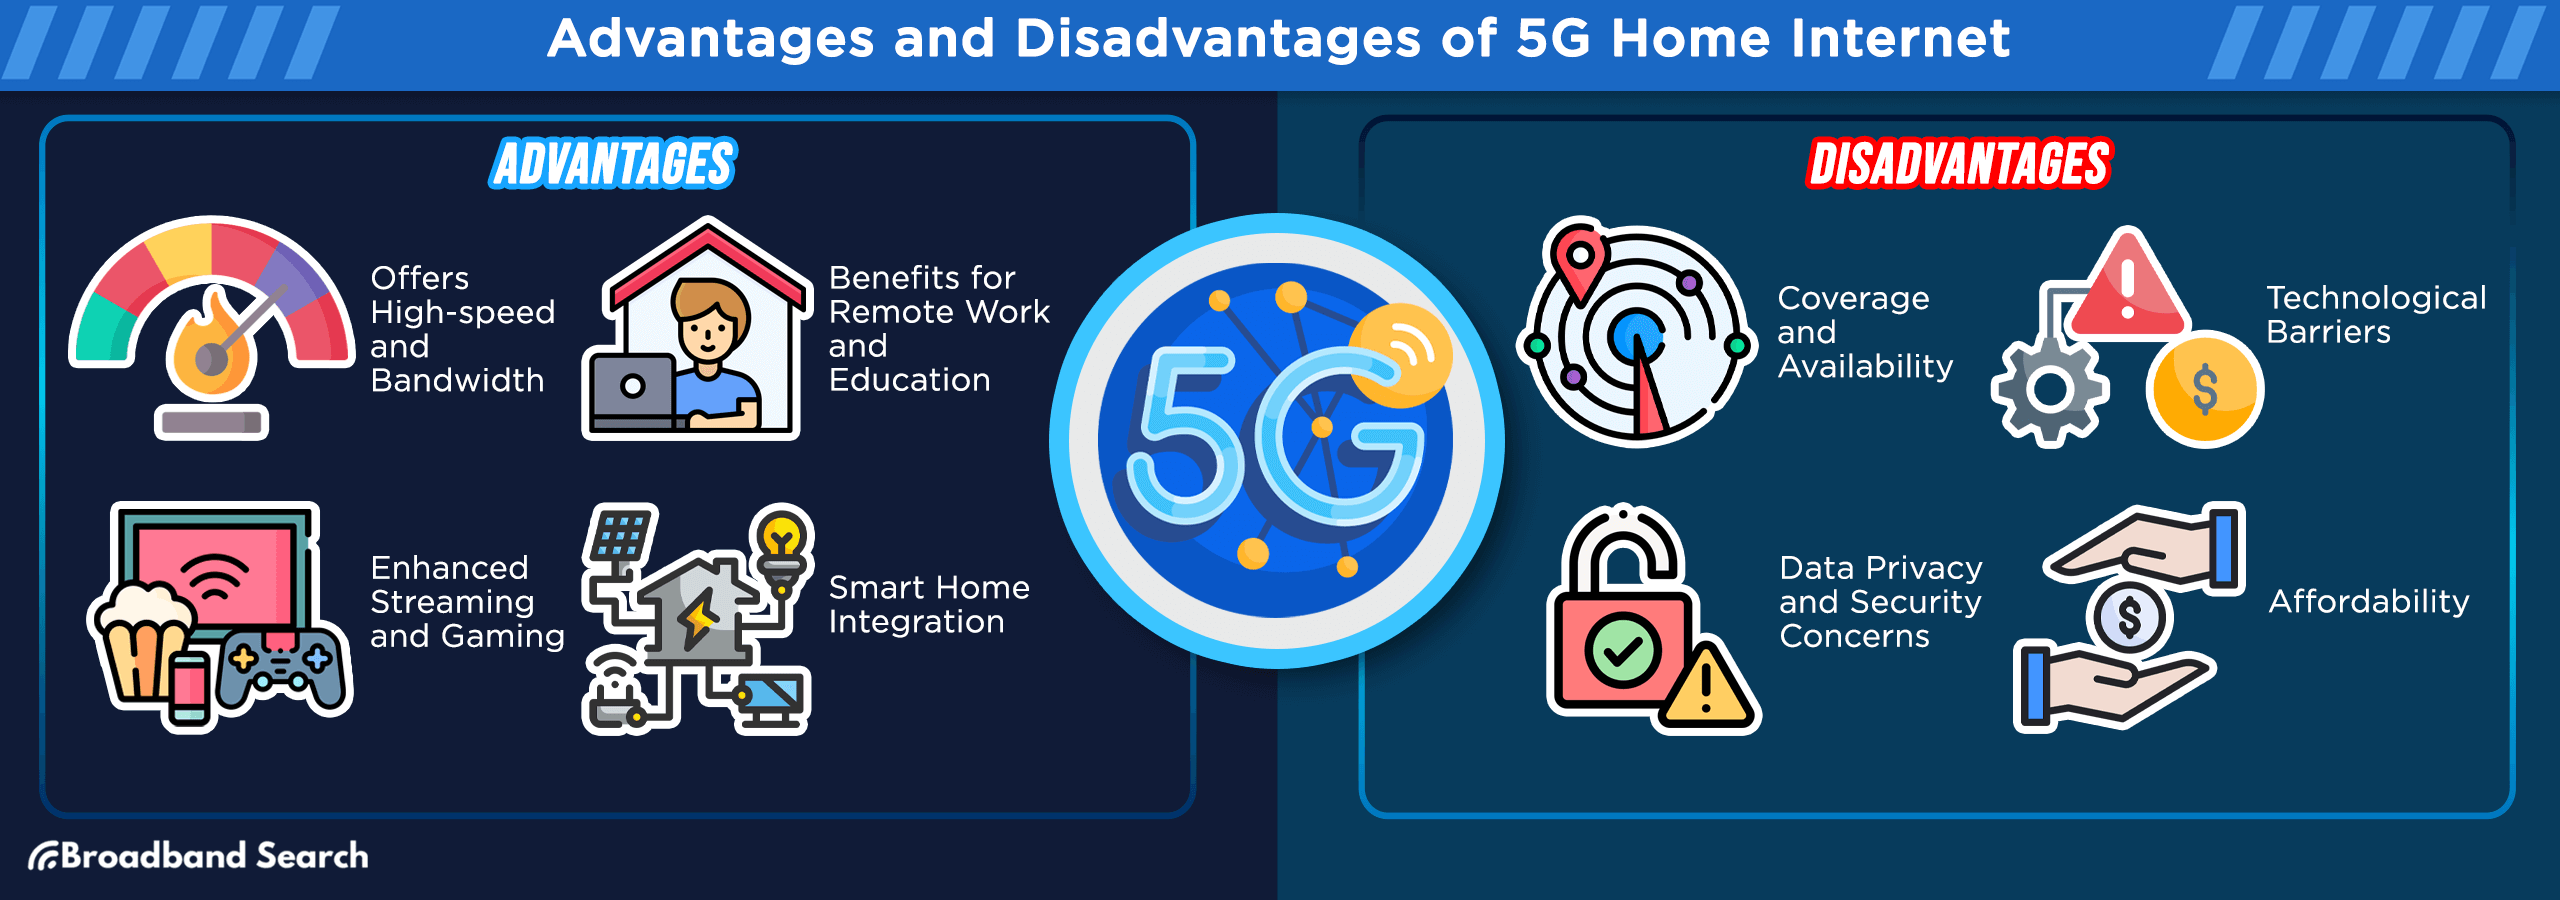 Advantages and disadvantages of 5g home internet